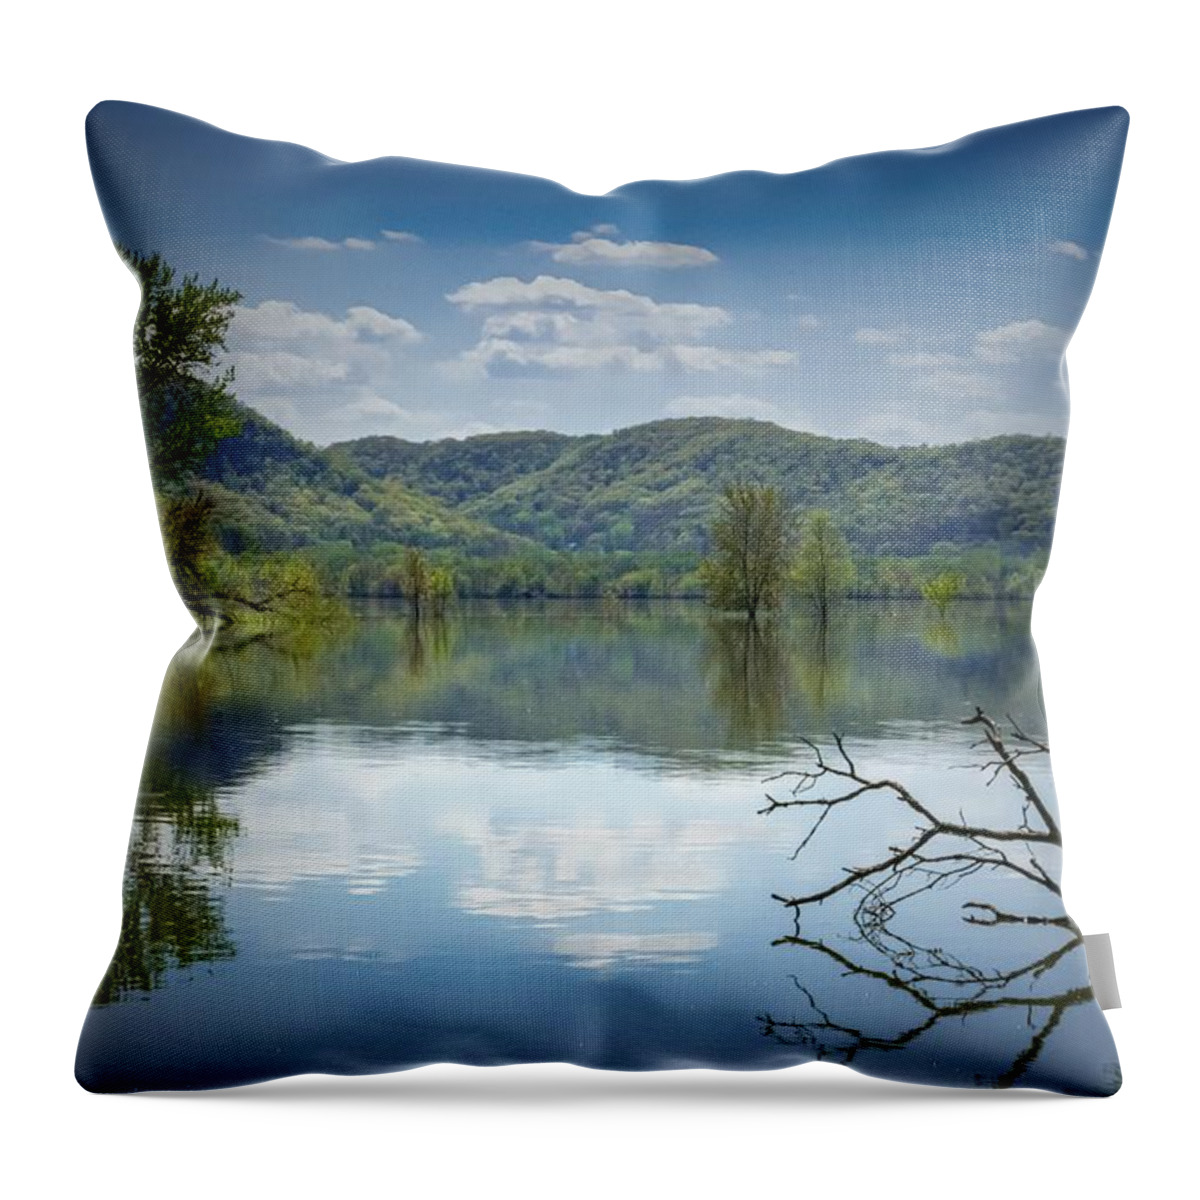 Driftwood Throw Pillow featuring the photograph Driftwood Two by Phil S Addis